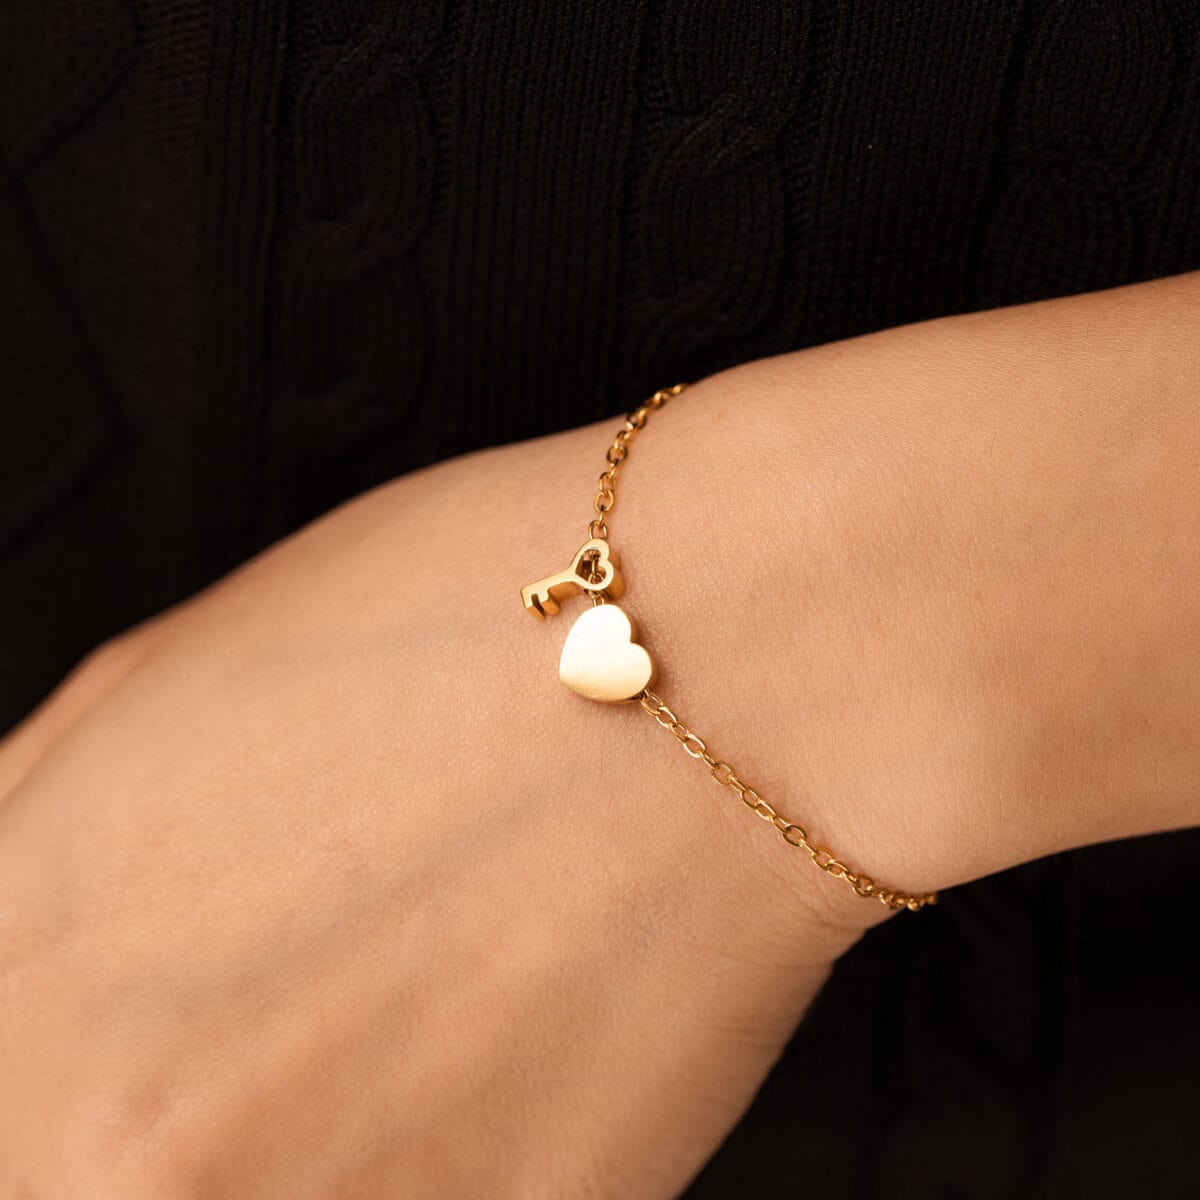 https://m.clubbella.co/product/key-to-thee-heart-gold-charm-bracelet/ Key to Thee Gold Charm bracelet (5)